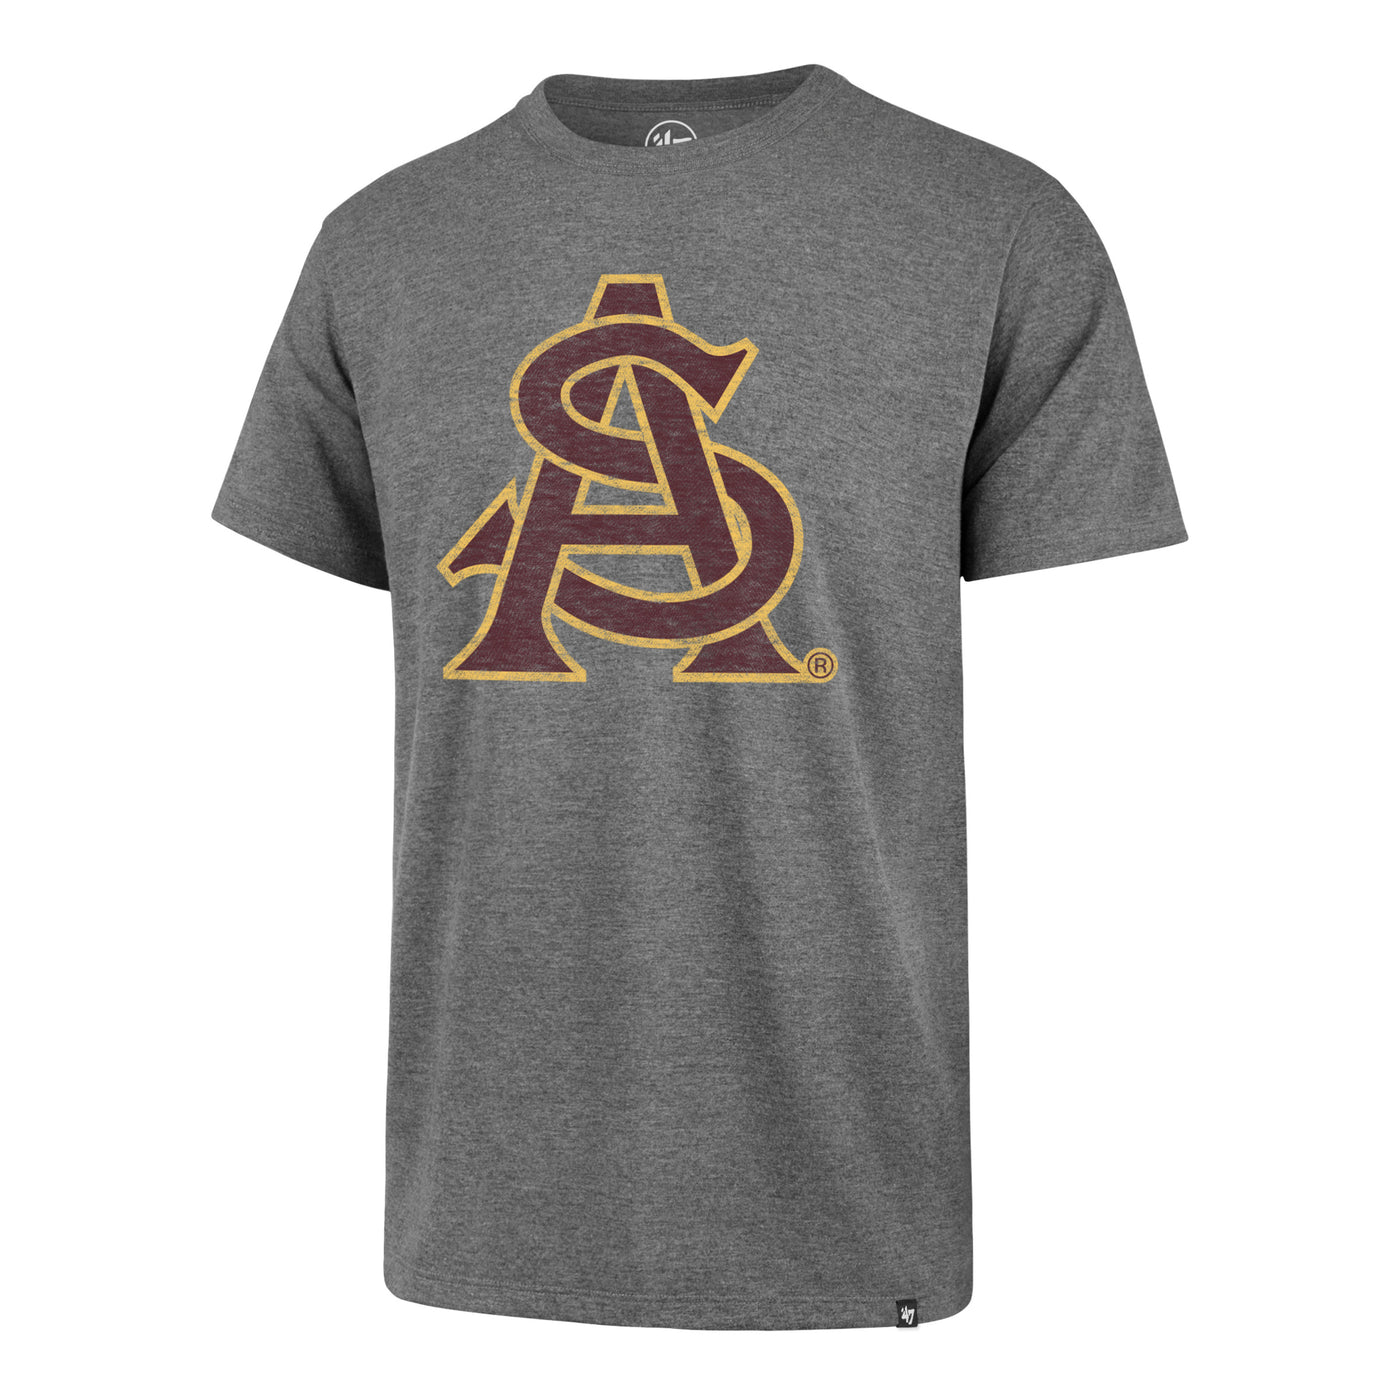 ASU grey tee with the old school A and S logo on the chest in maroon and gold.